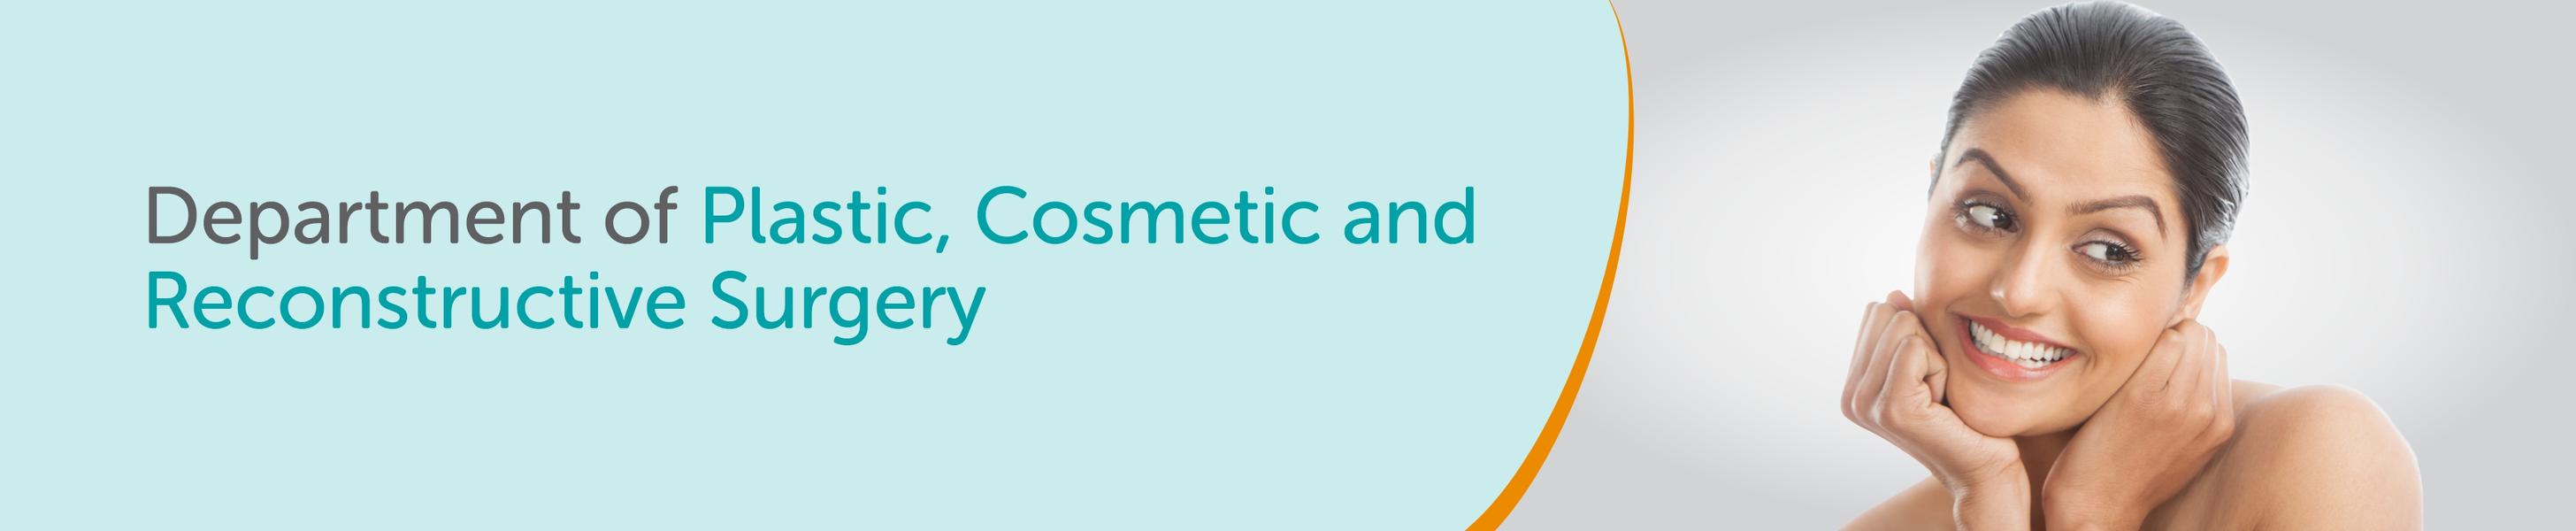 LBN Department of Plastic, Cosmetic & Reconstructive Surgery web Banner